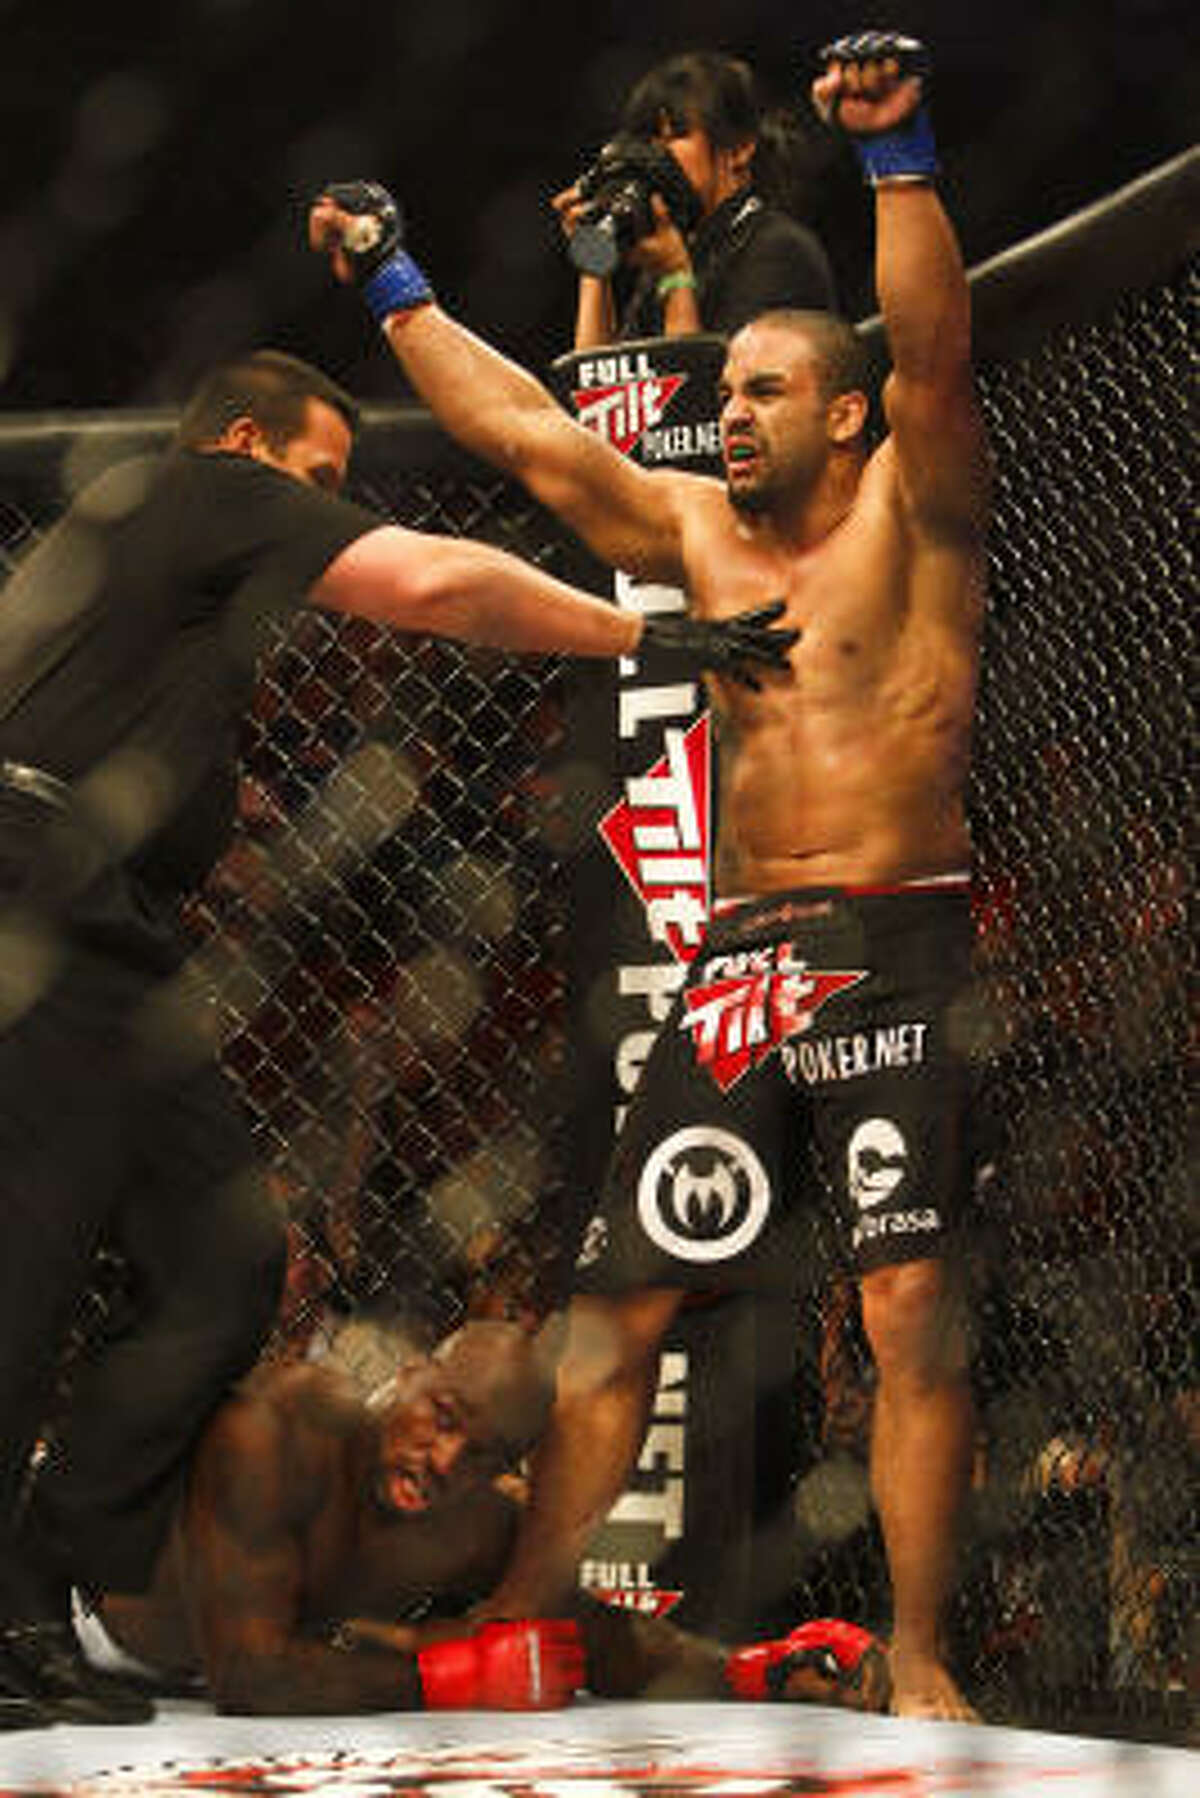 Rafael "Feijao" Cavalcante celebrates as the ref steps in to call the fight as "King" Mo Lawal falls to the ground.